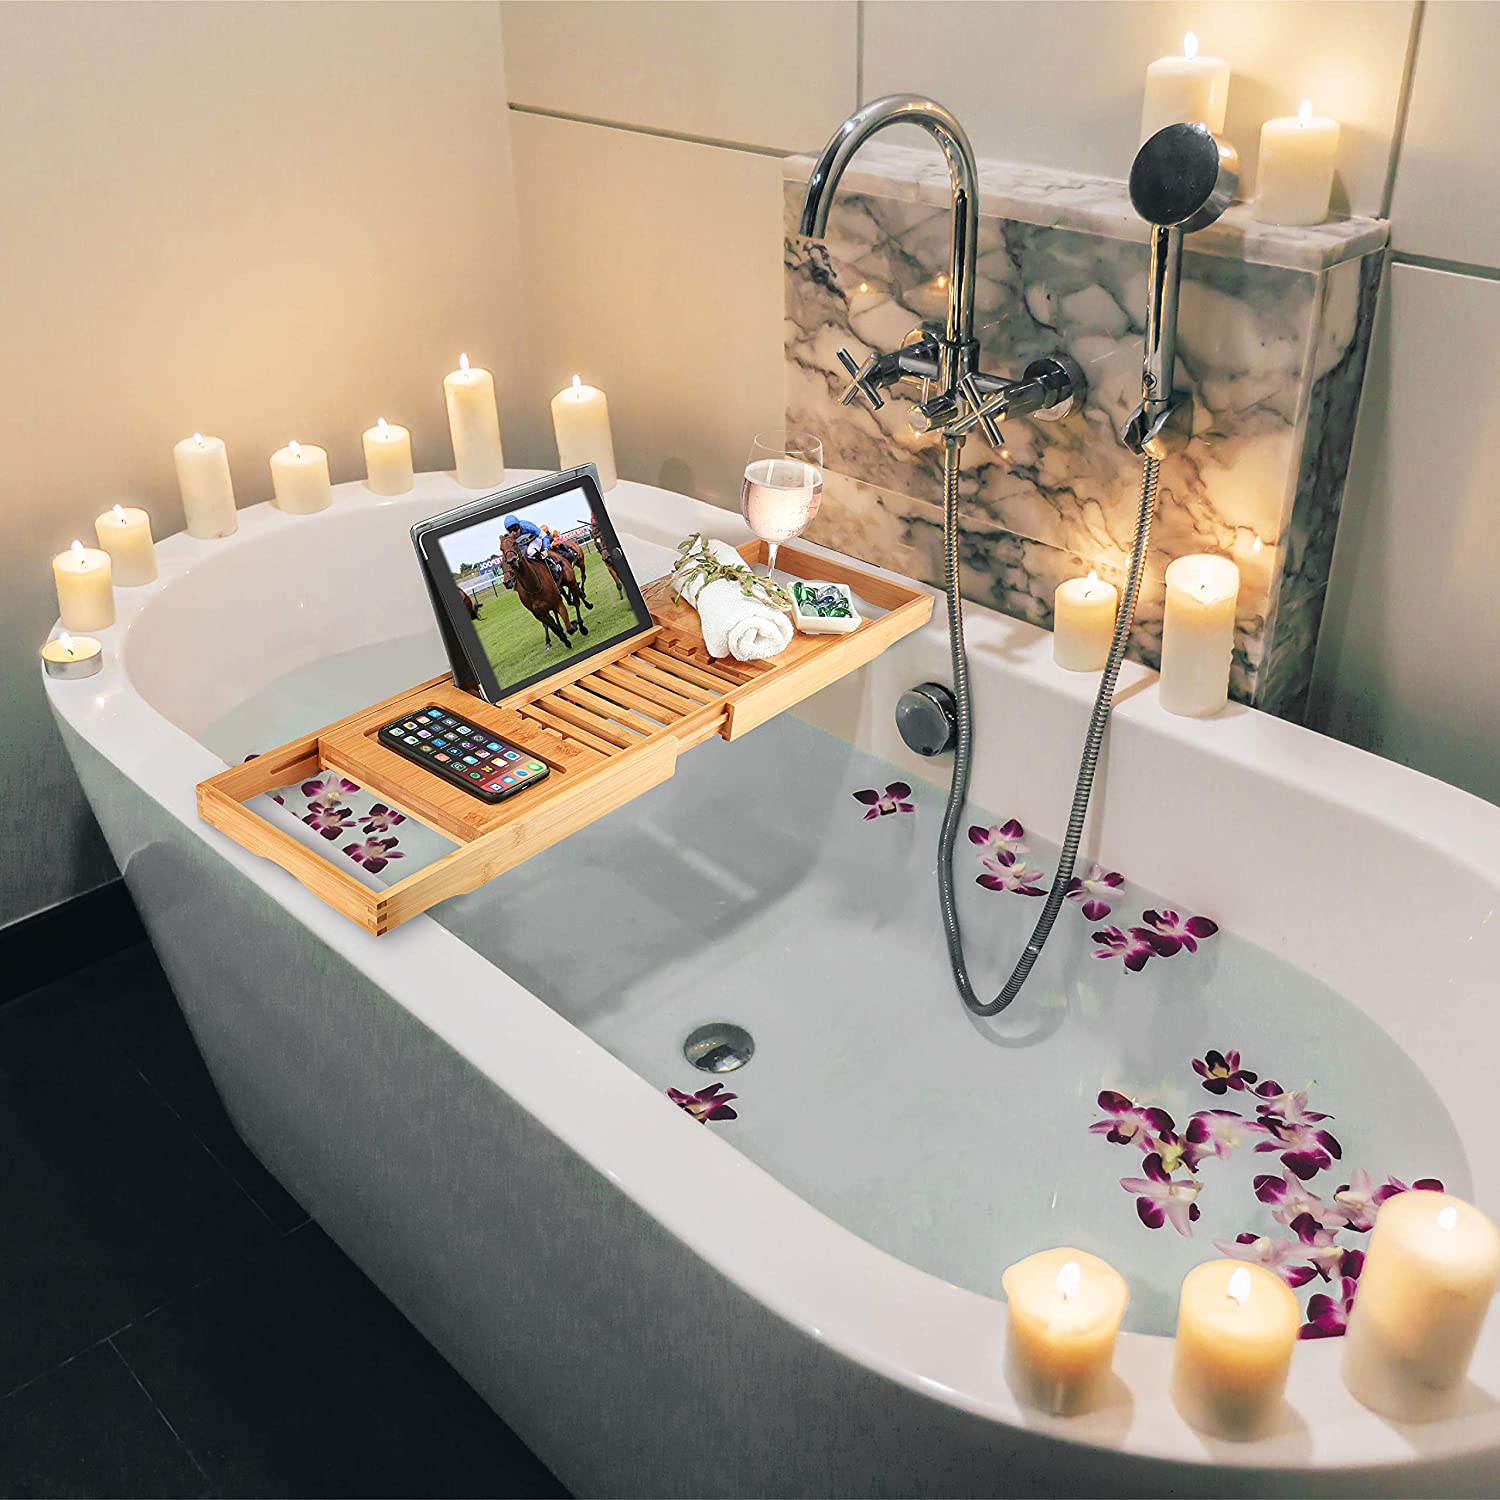 Bath tub filled with water and flower petals with candles around the edge and a bath tray across the center holding a tablet, a phone, and a glass of wine..